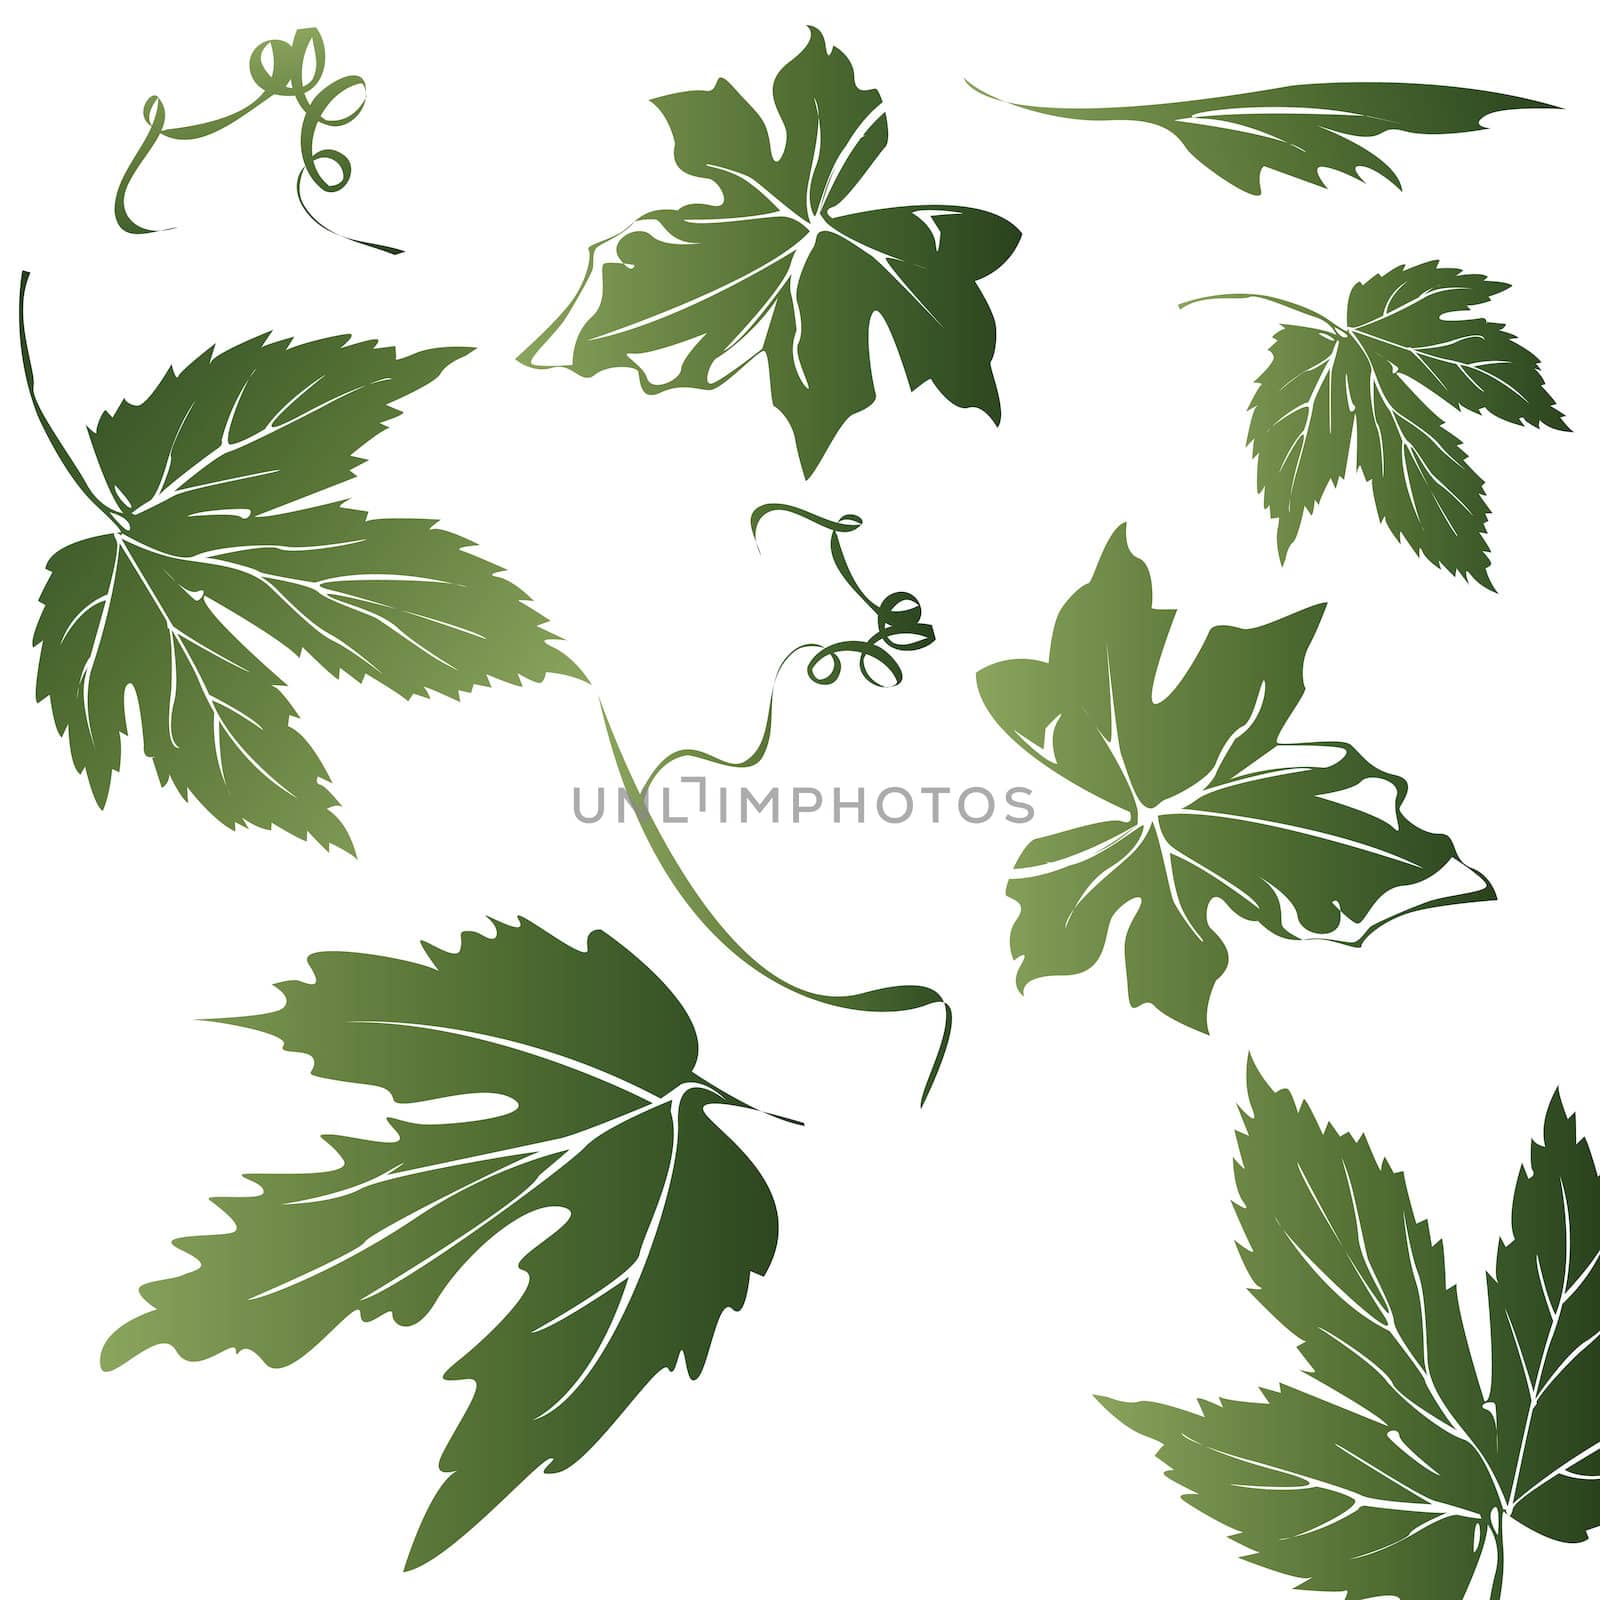 grapevine leaves silhouettes- elements for design